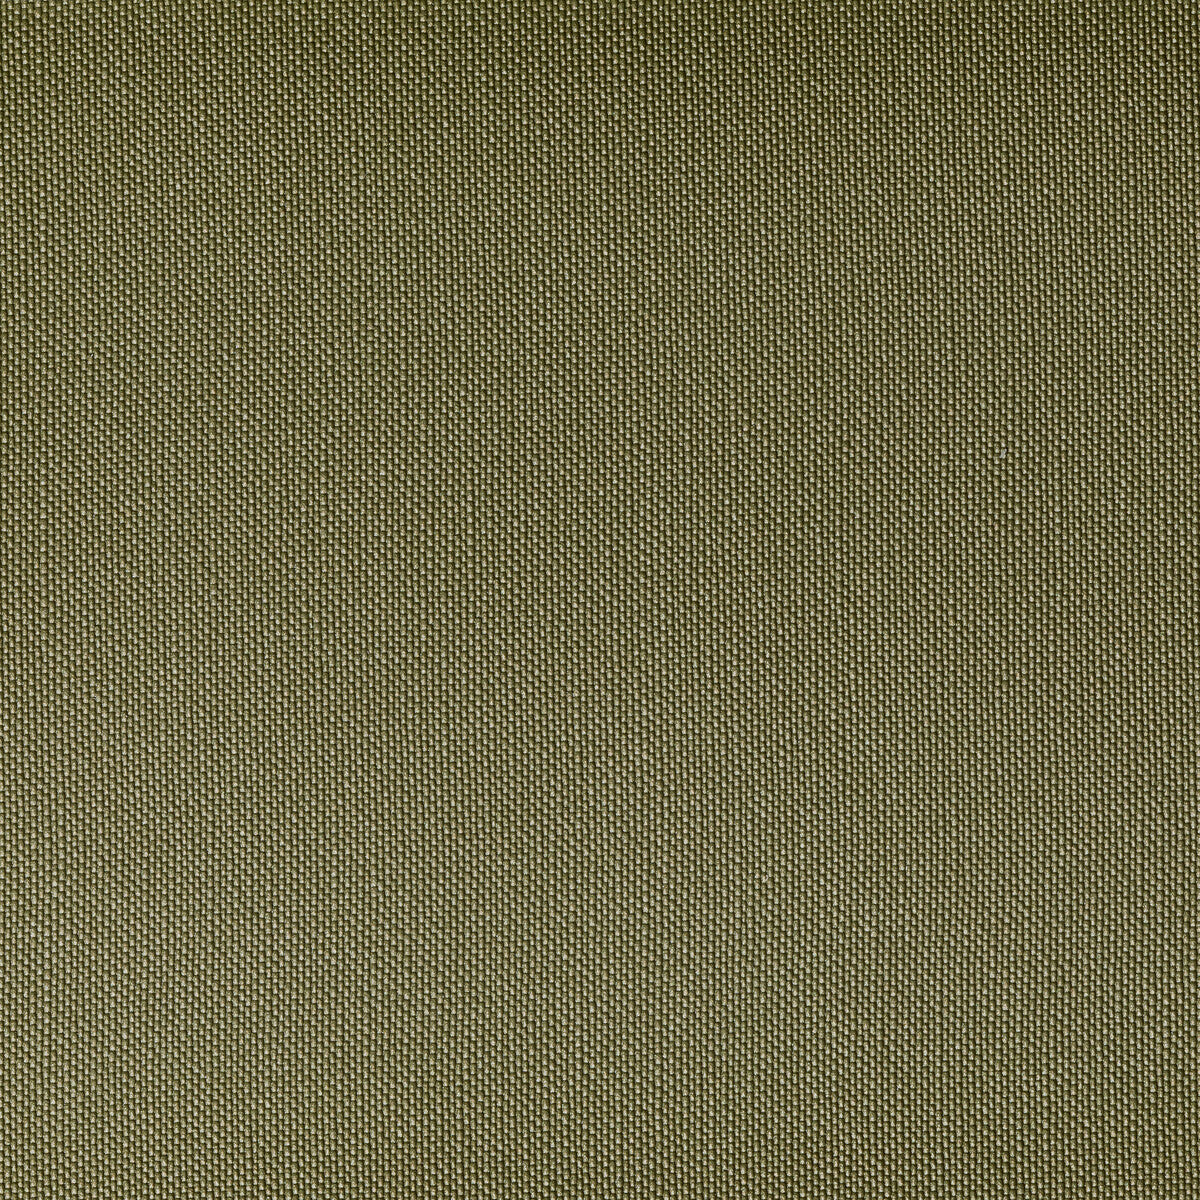 Ventura fabric in willow color - pattern VENTURA.130.0 - by Kravet Contract in the Foundations / Value collection